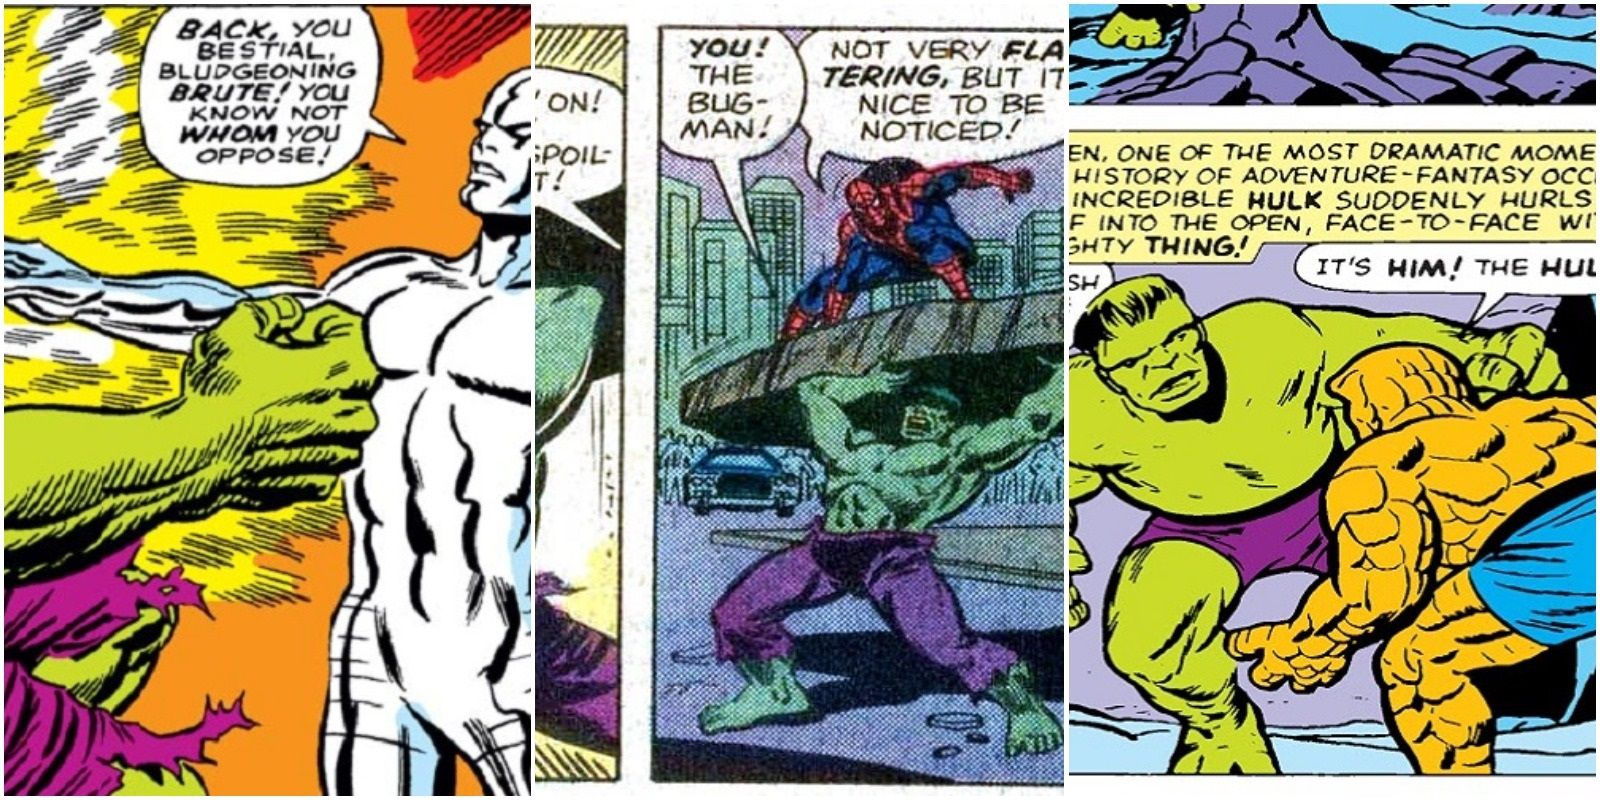 The Hulk Has Fought Many Marvel Superheroes - Hulk, Thing and more